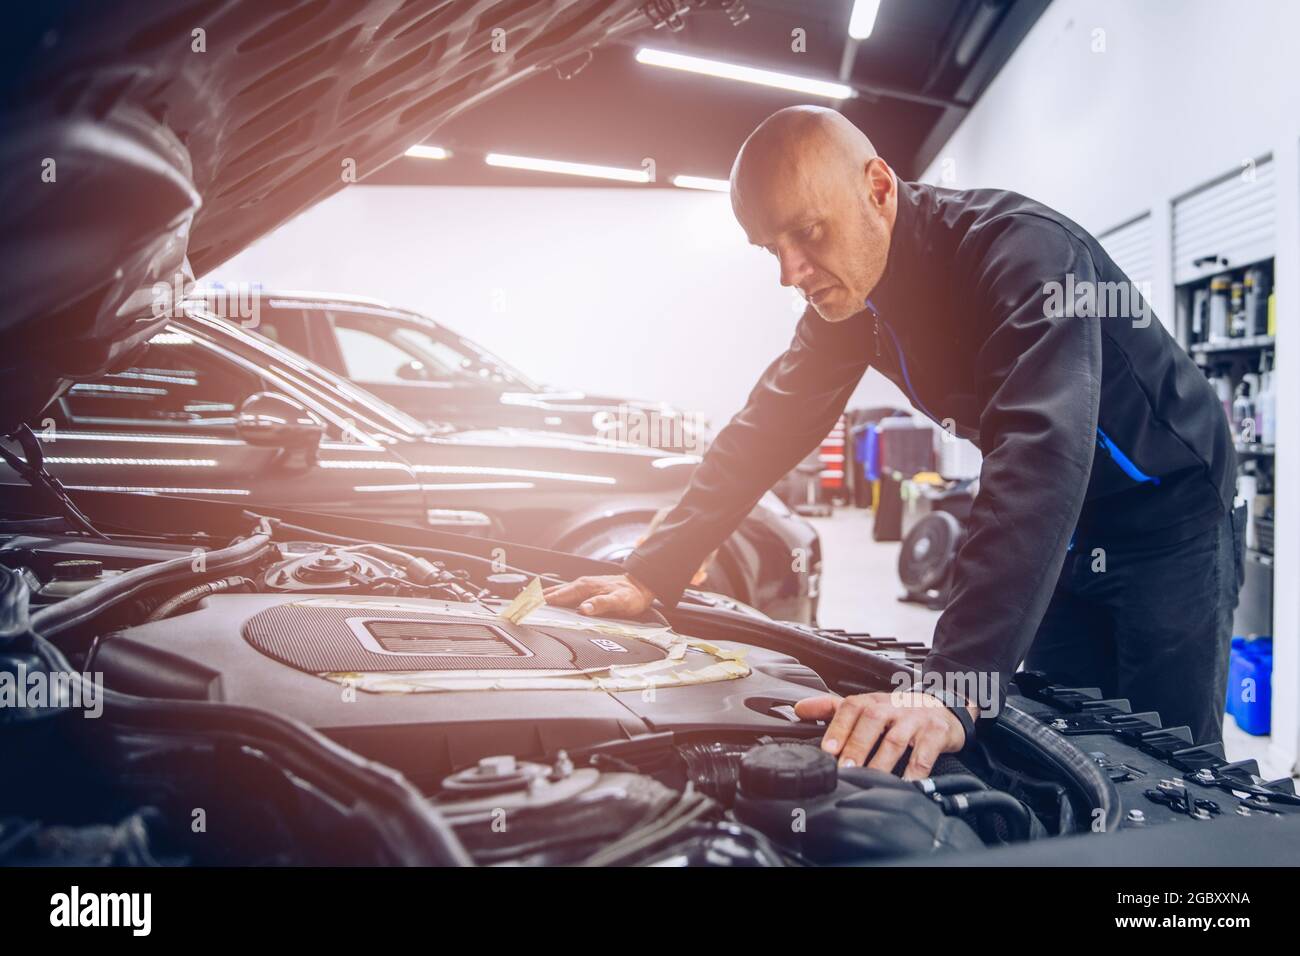 Mechanic in automobile service checking and inspecting car engine